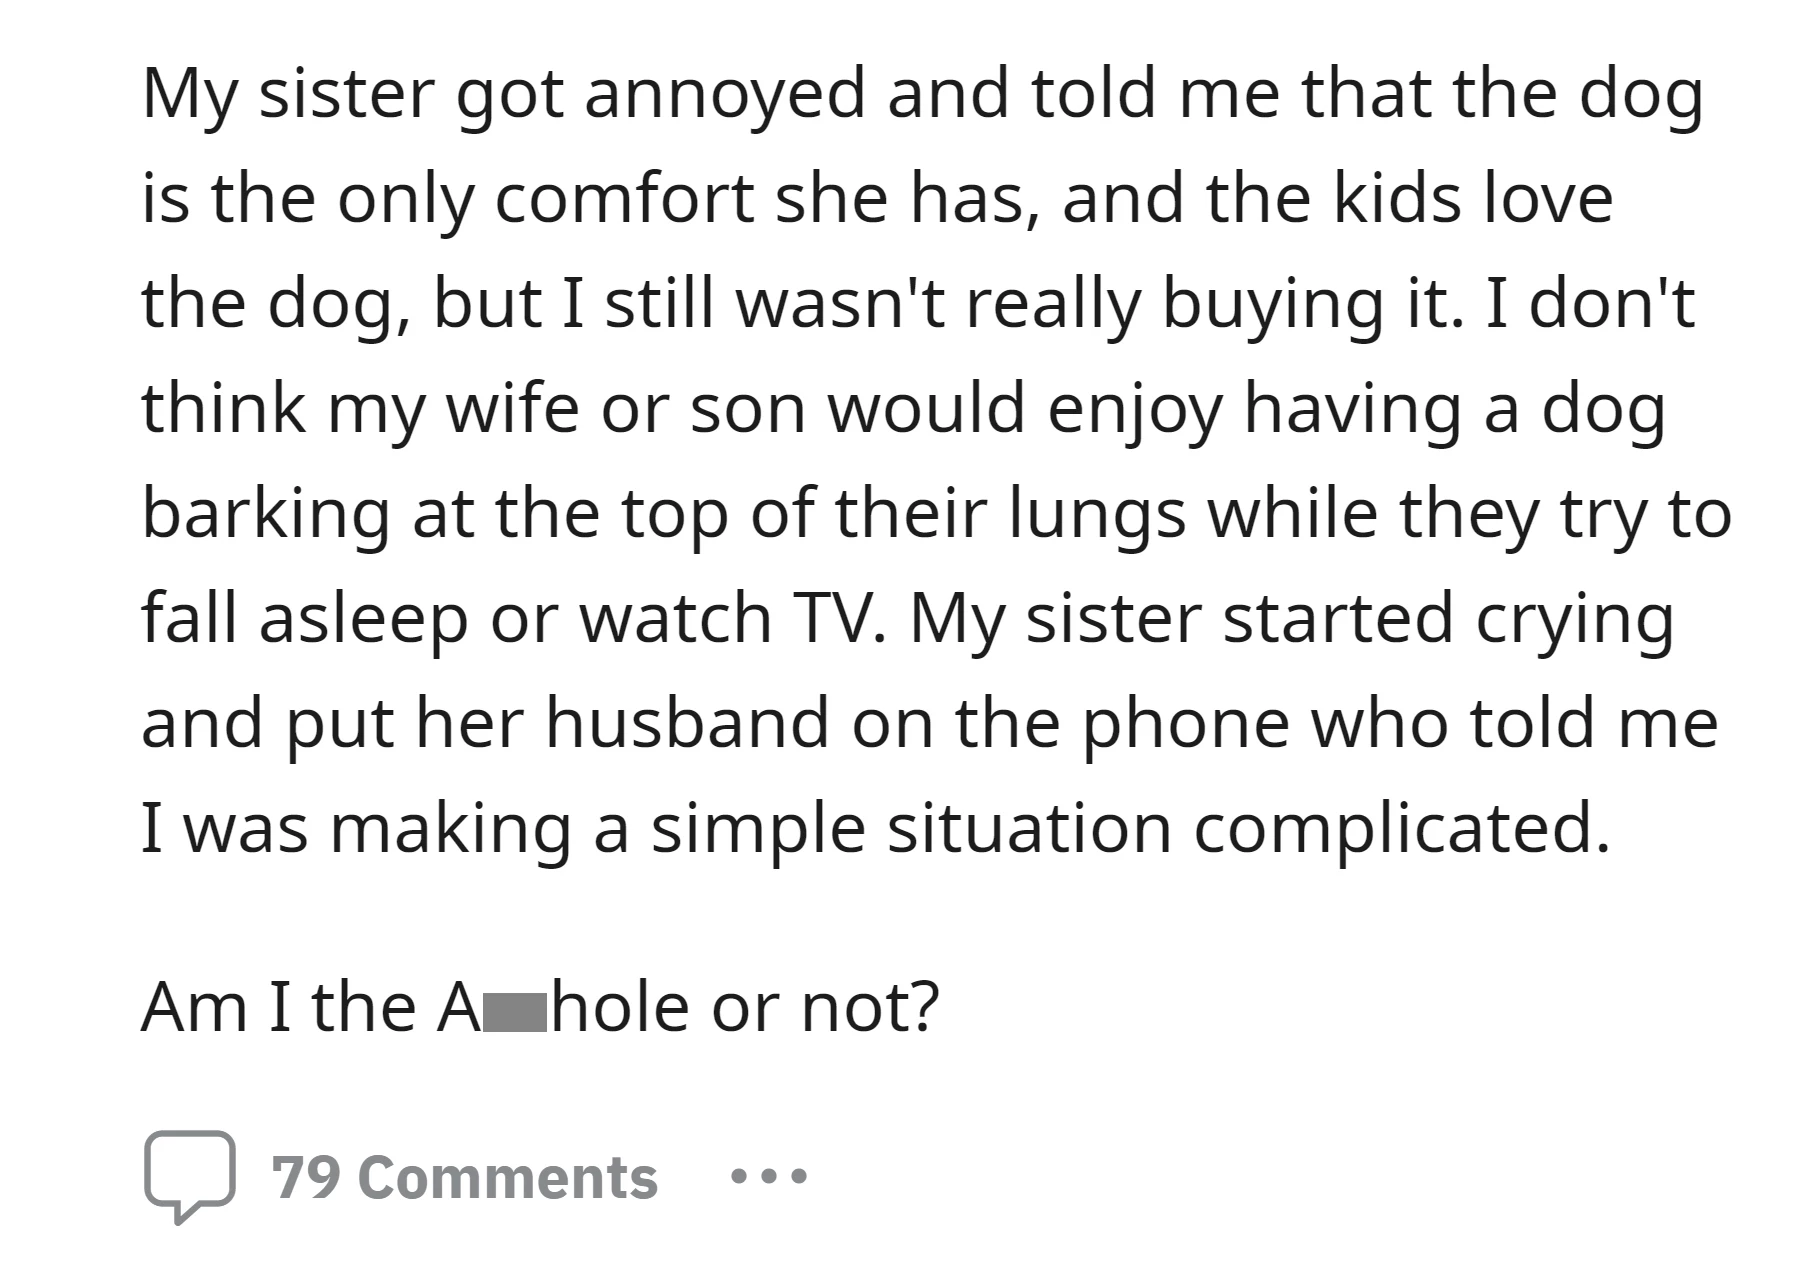 OP's sister insisted on moving in with her dog